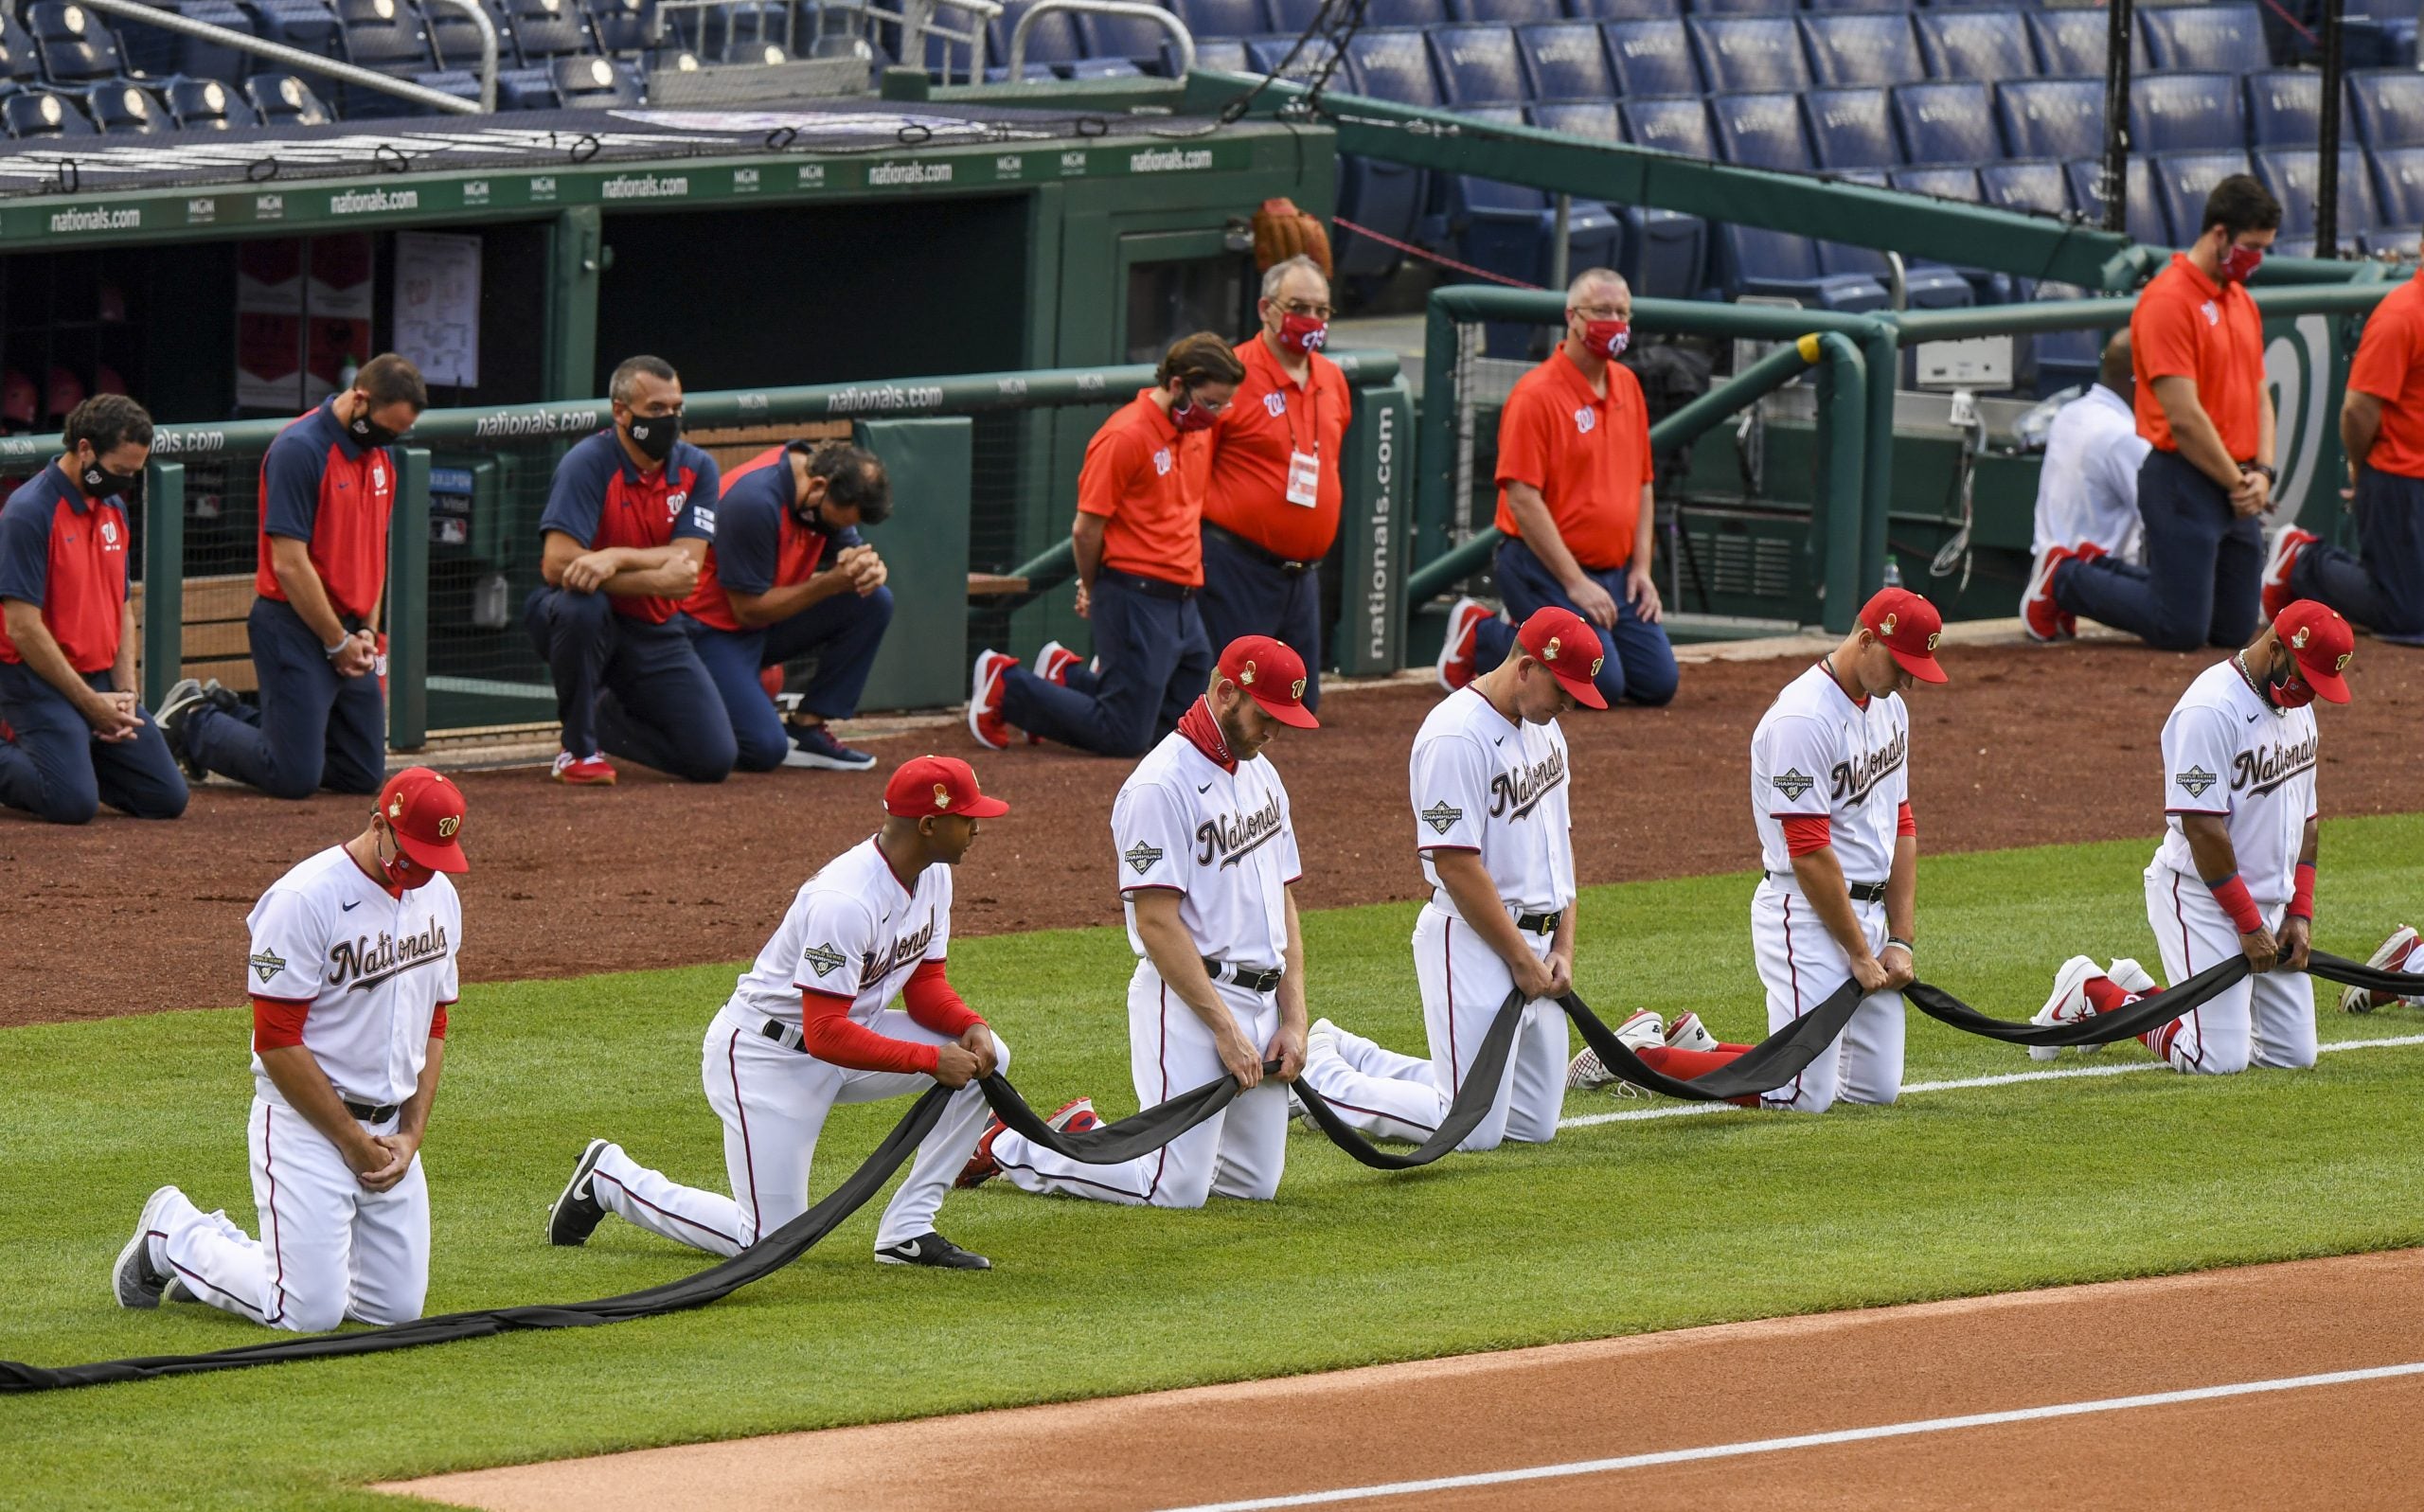 Baseball Players Take A Knee To Support Black Lives Matter Movement